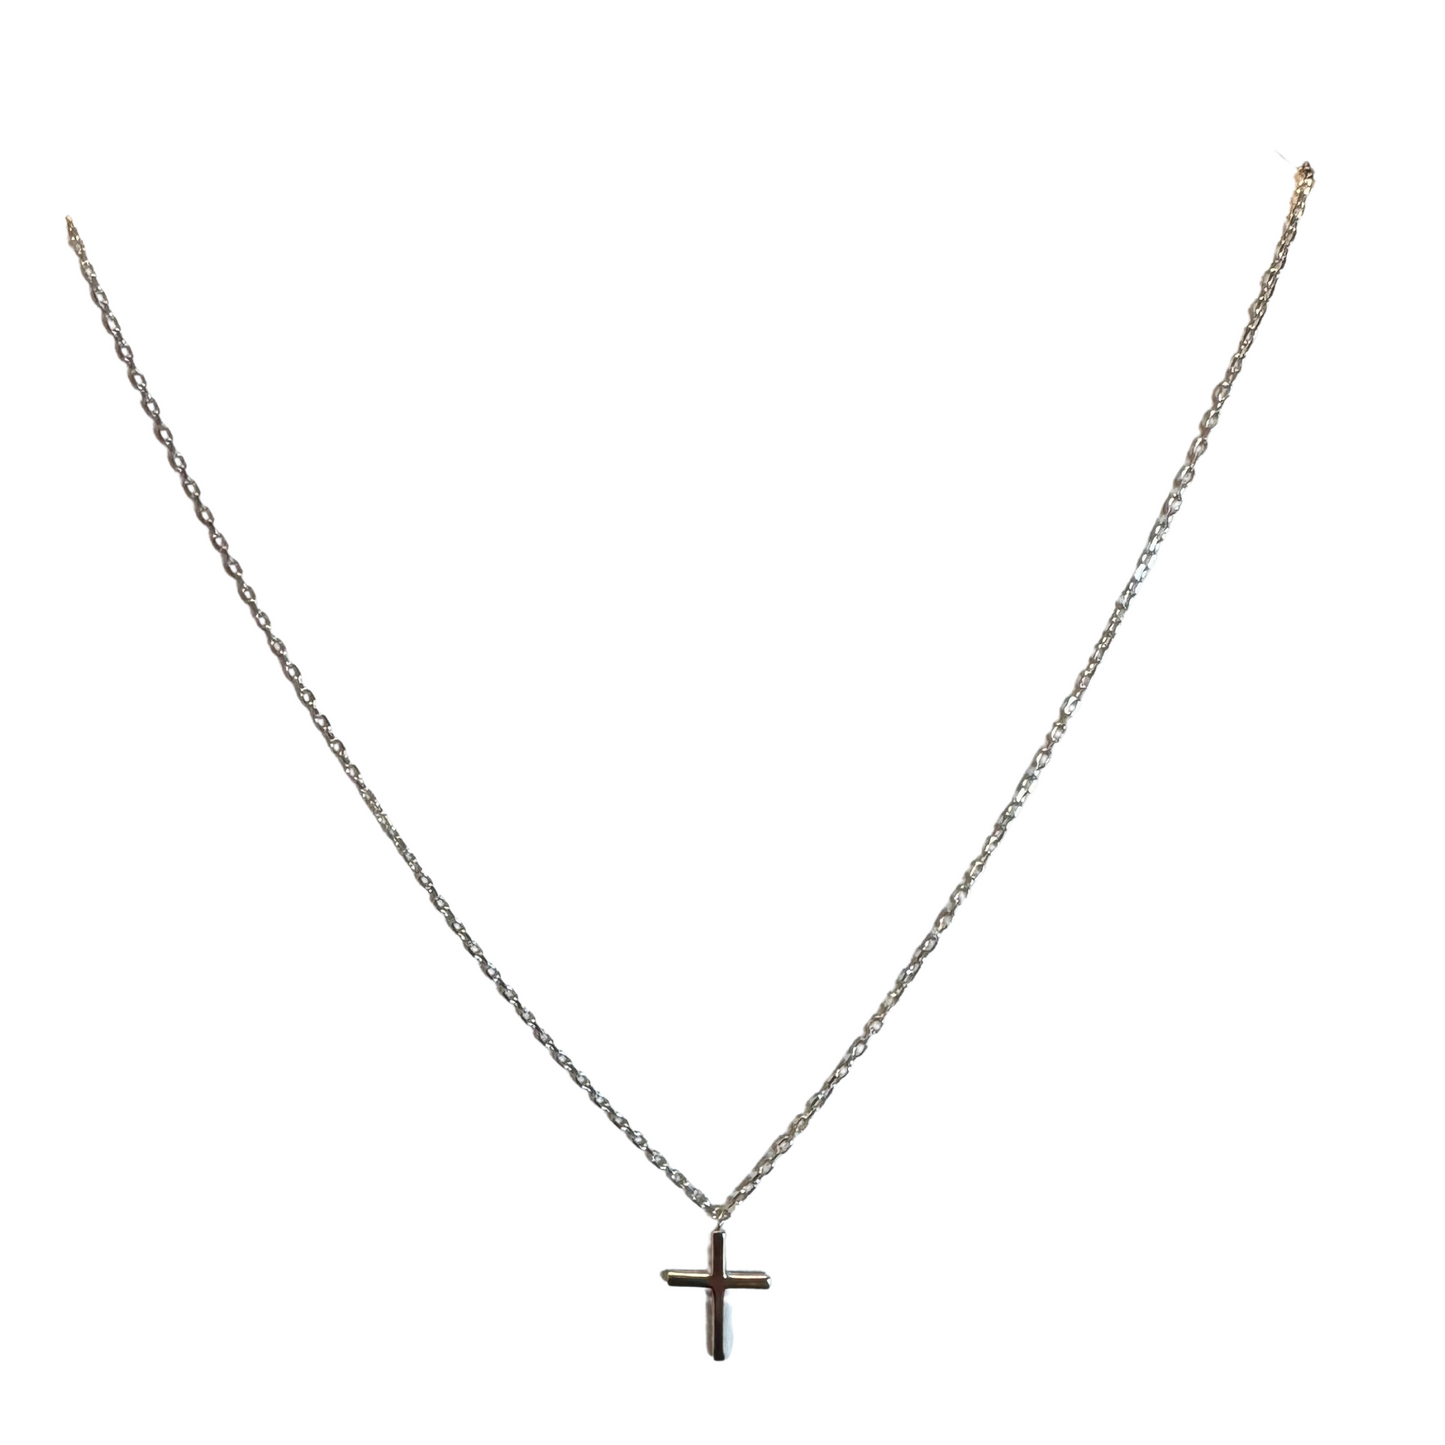 Small cross necklace in silver 